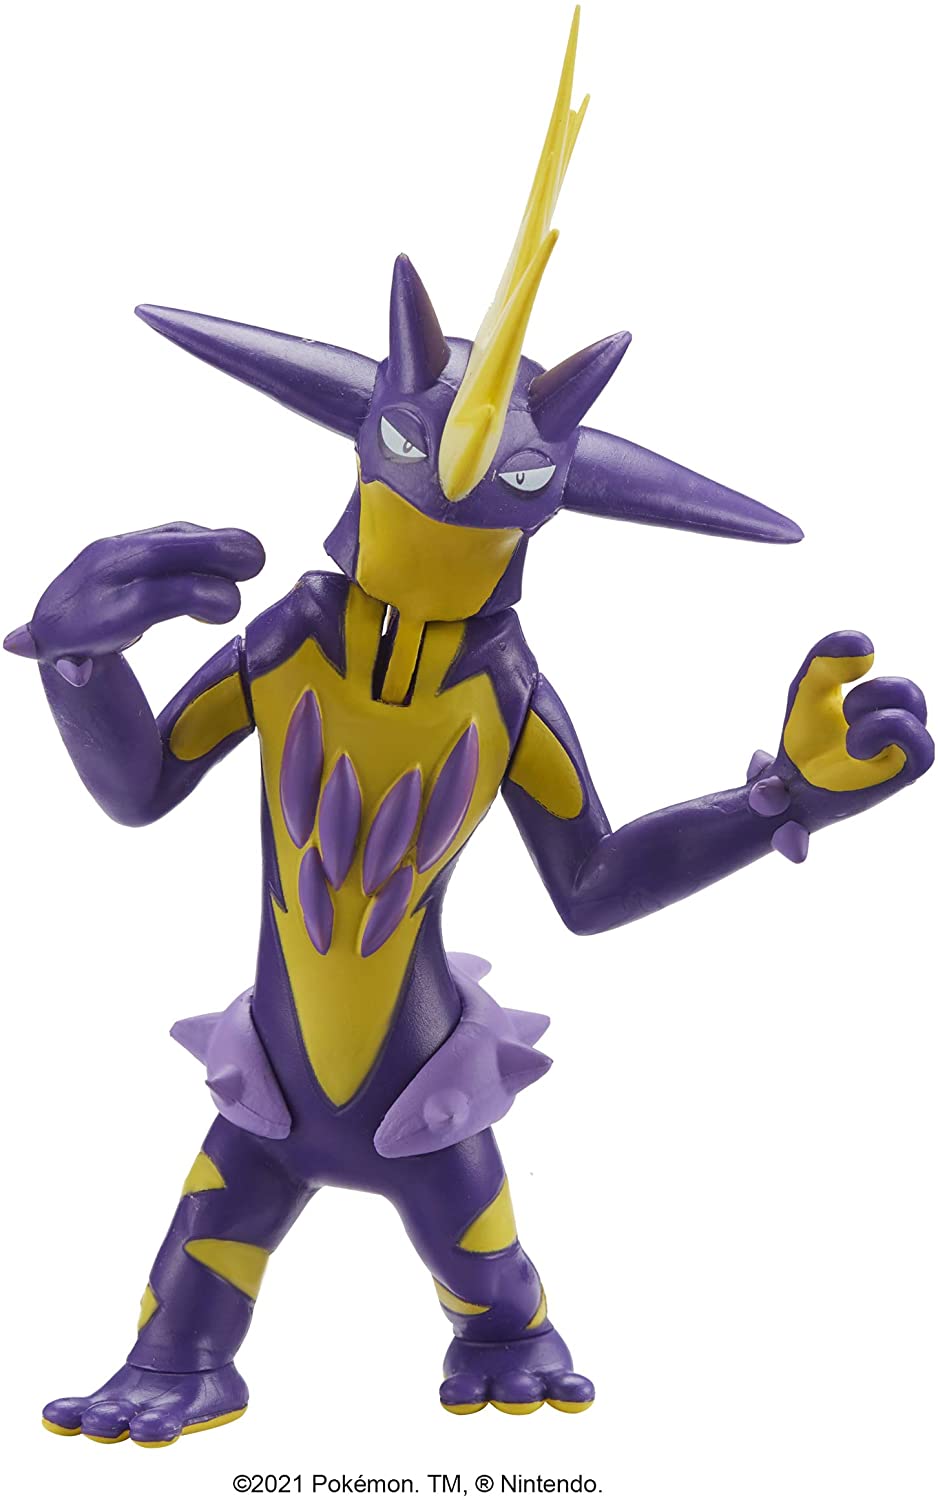 AB Gee Pokemon Battle Feature 4.5" Figure - Toxtricity, Red, 674 PKW0161